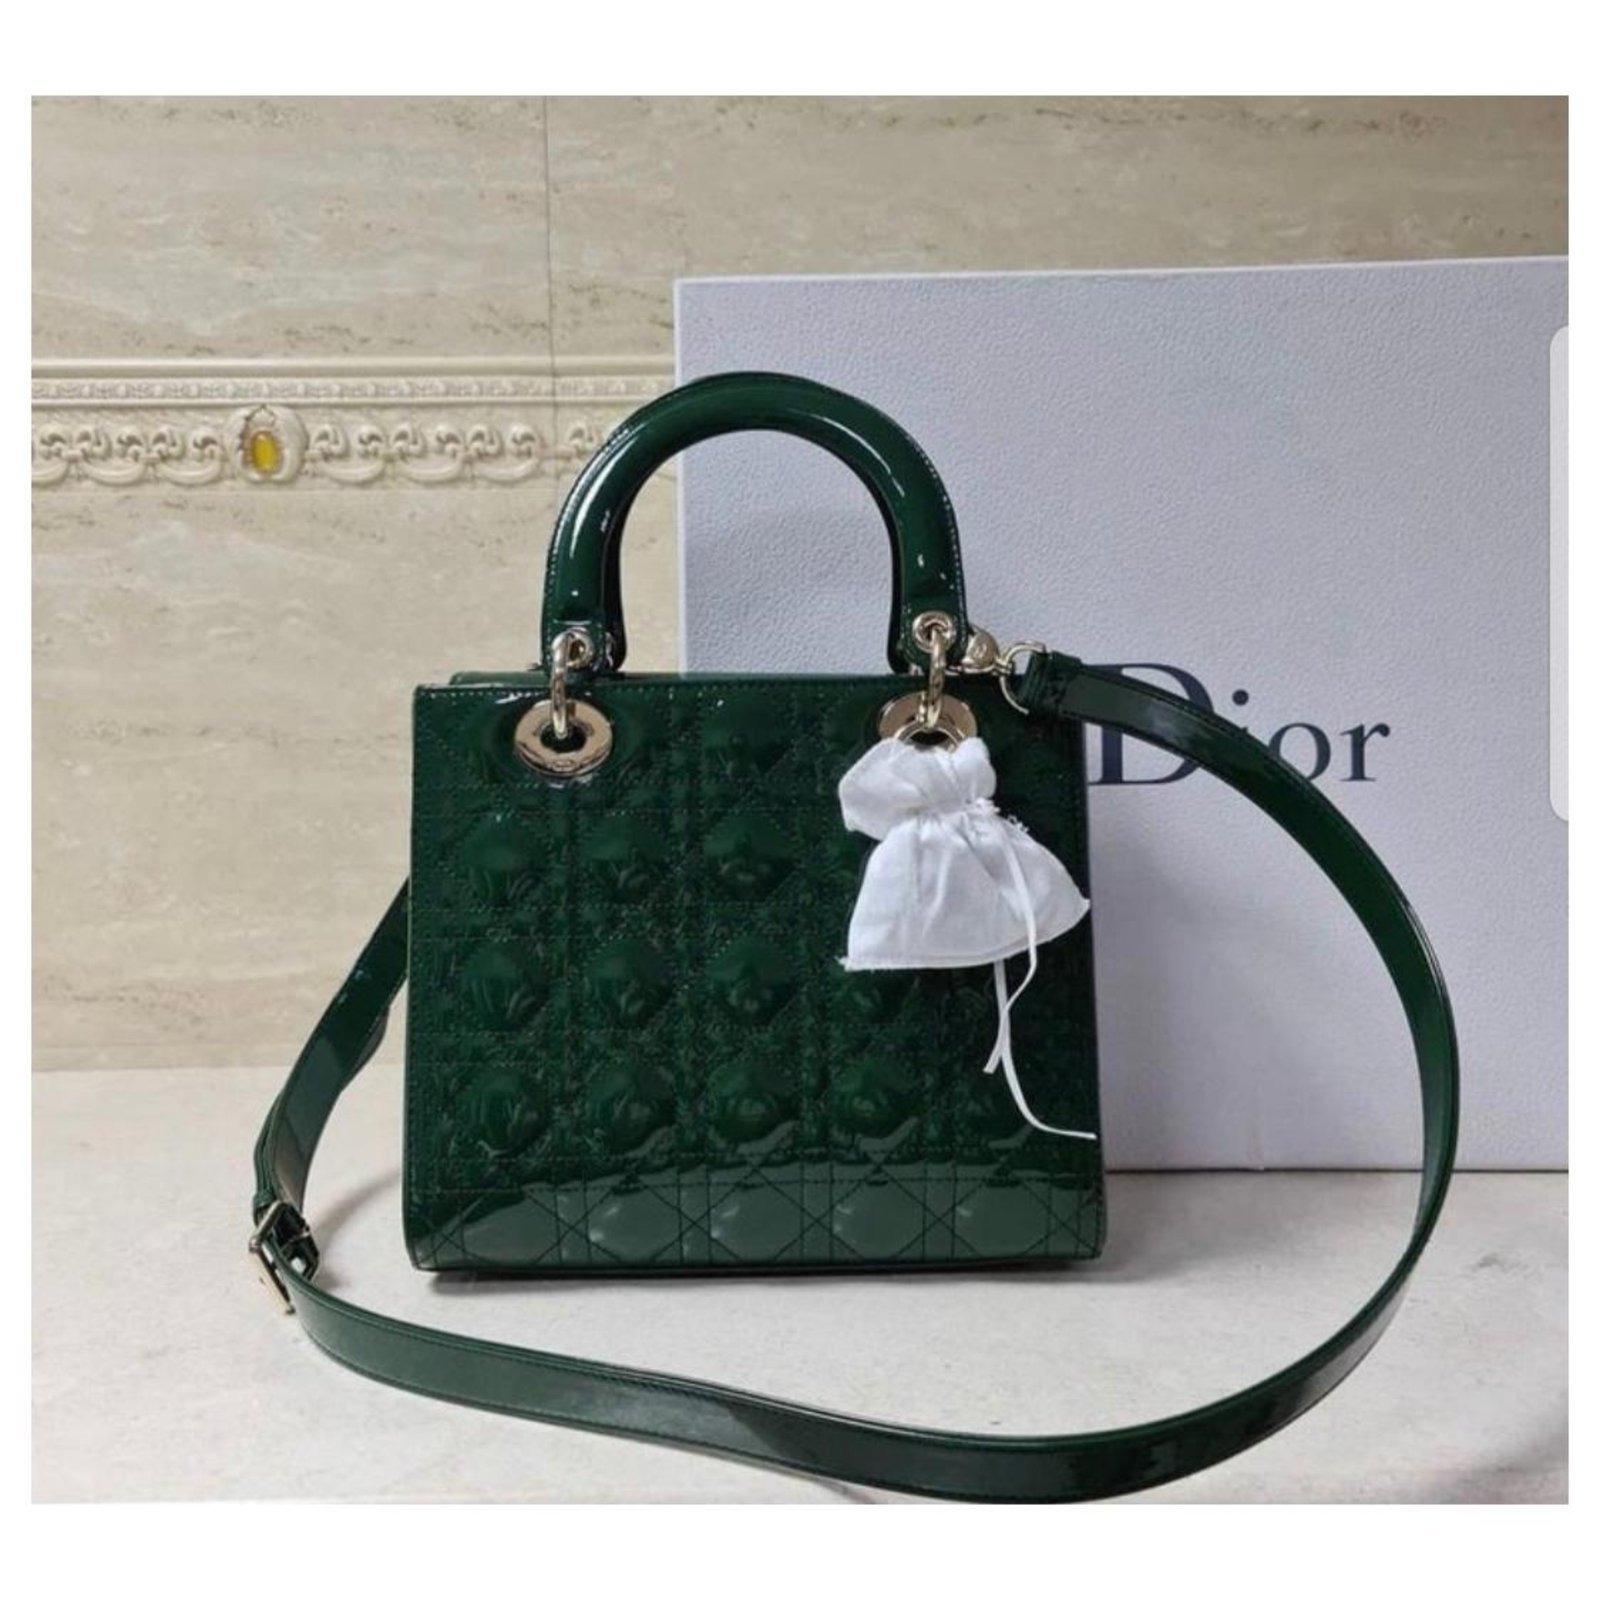 The Lady Dior in the Ethereal Green is the perfect neutral diorbag   YouTube